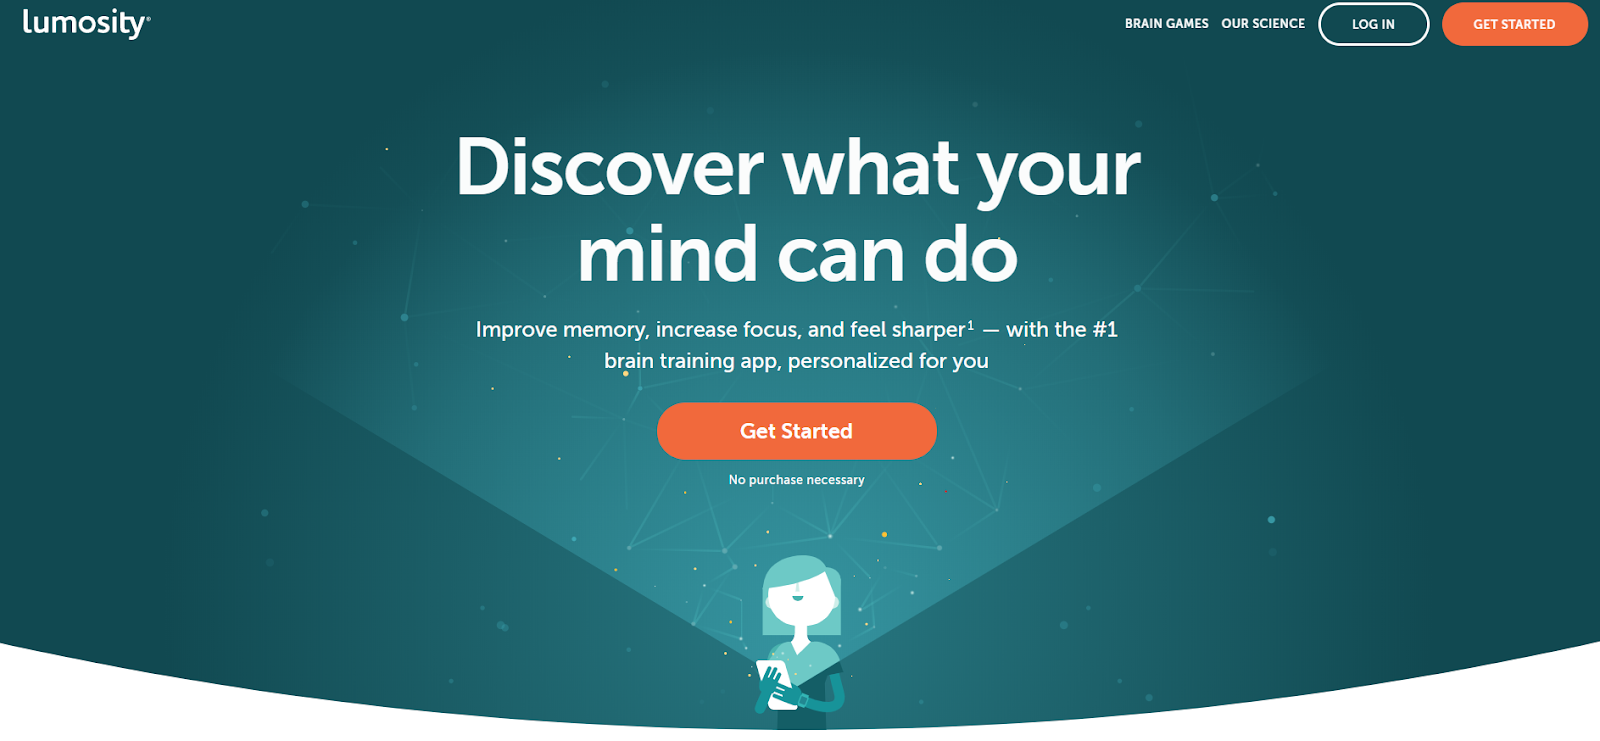 Lumosity can help to train your brain.